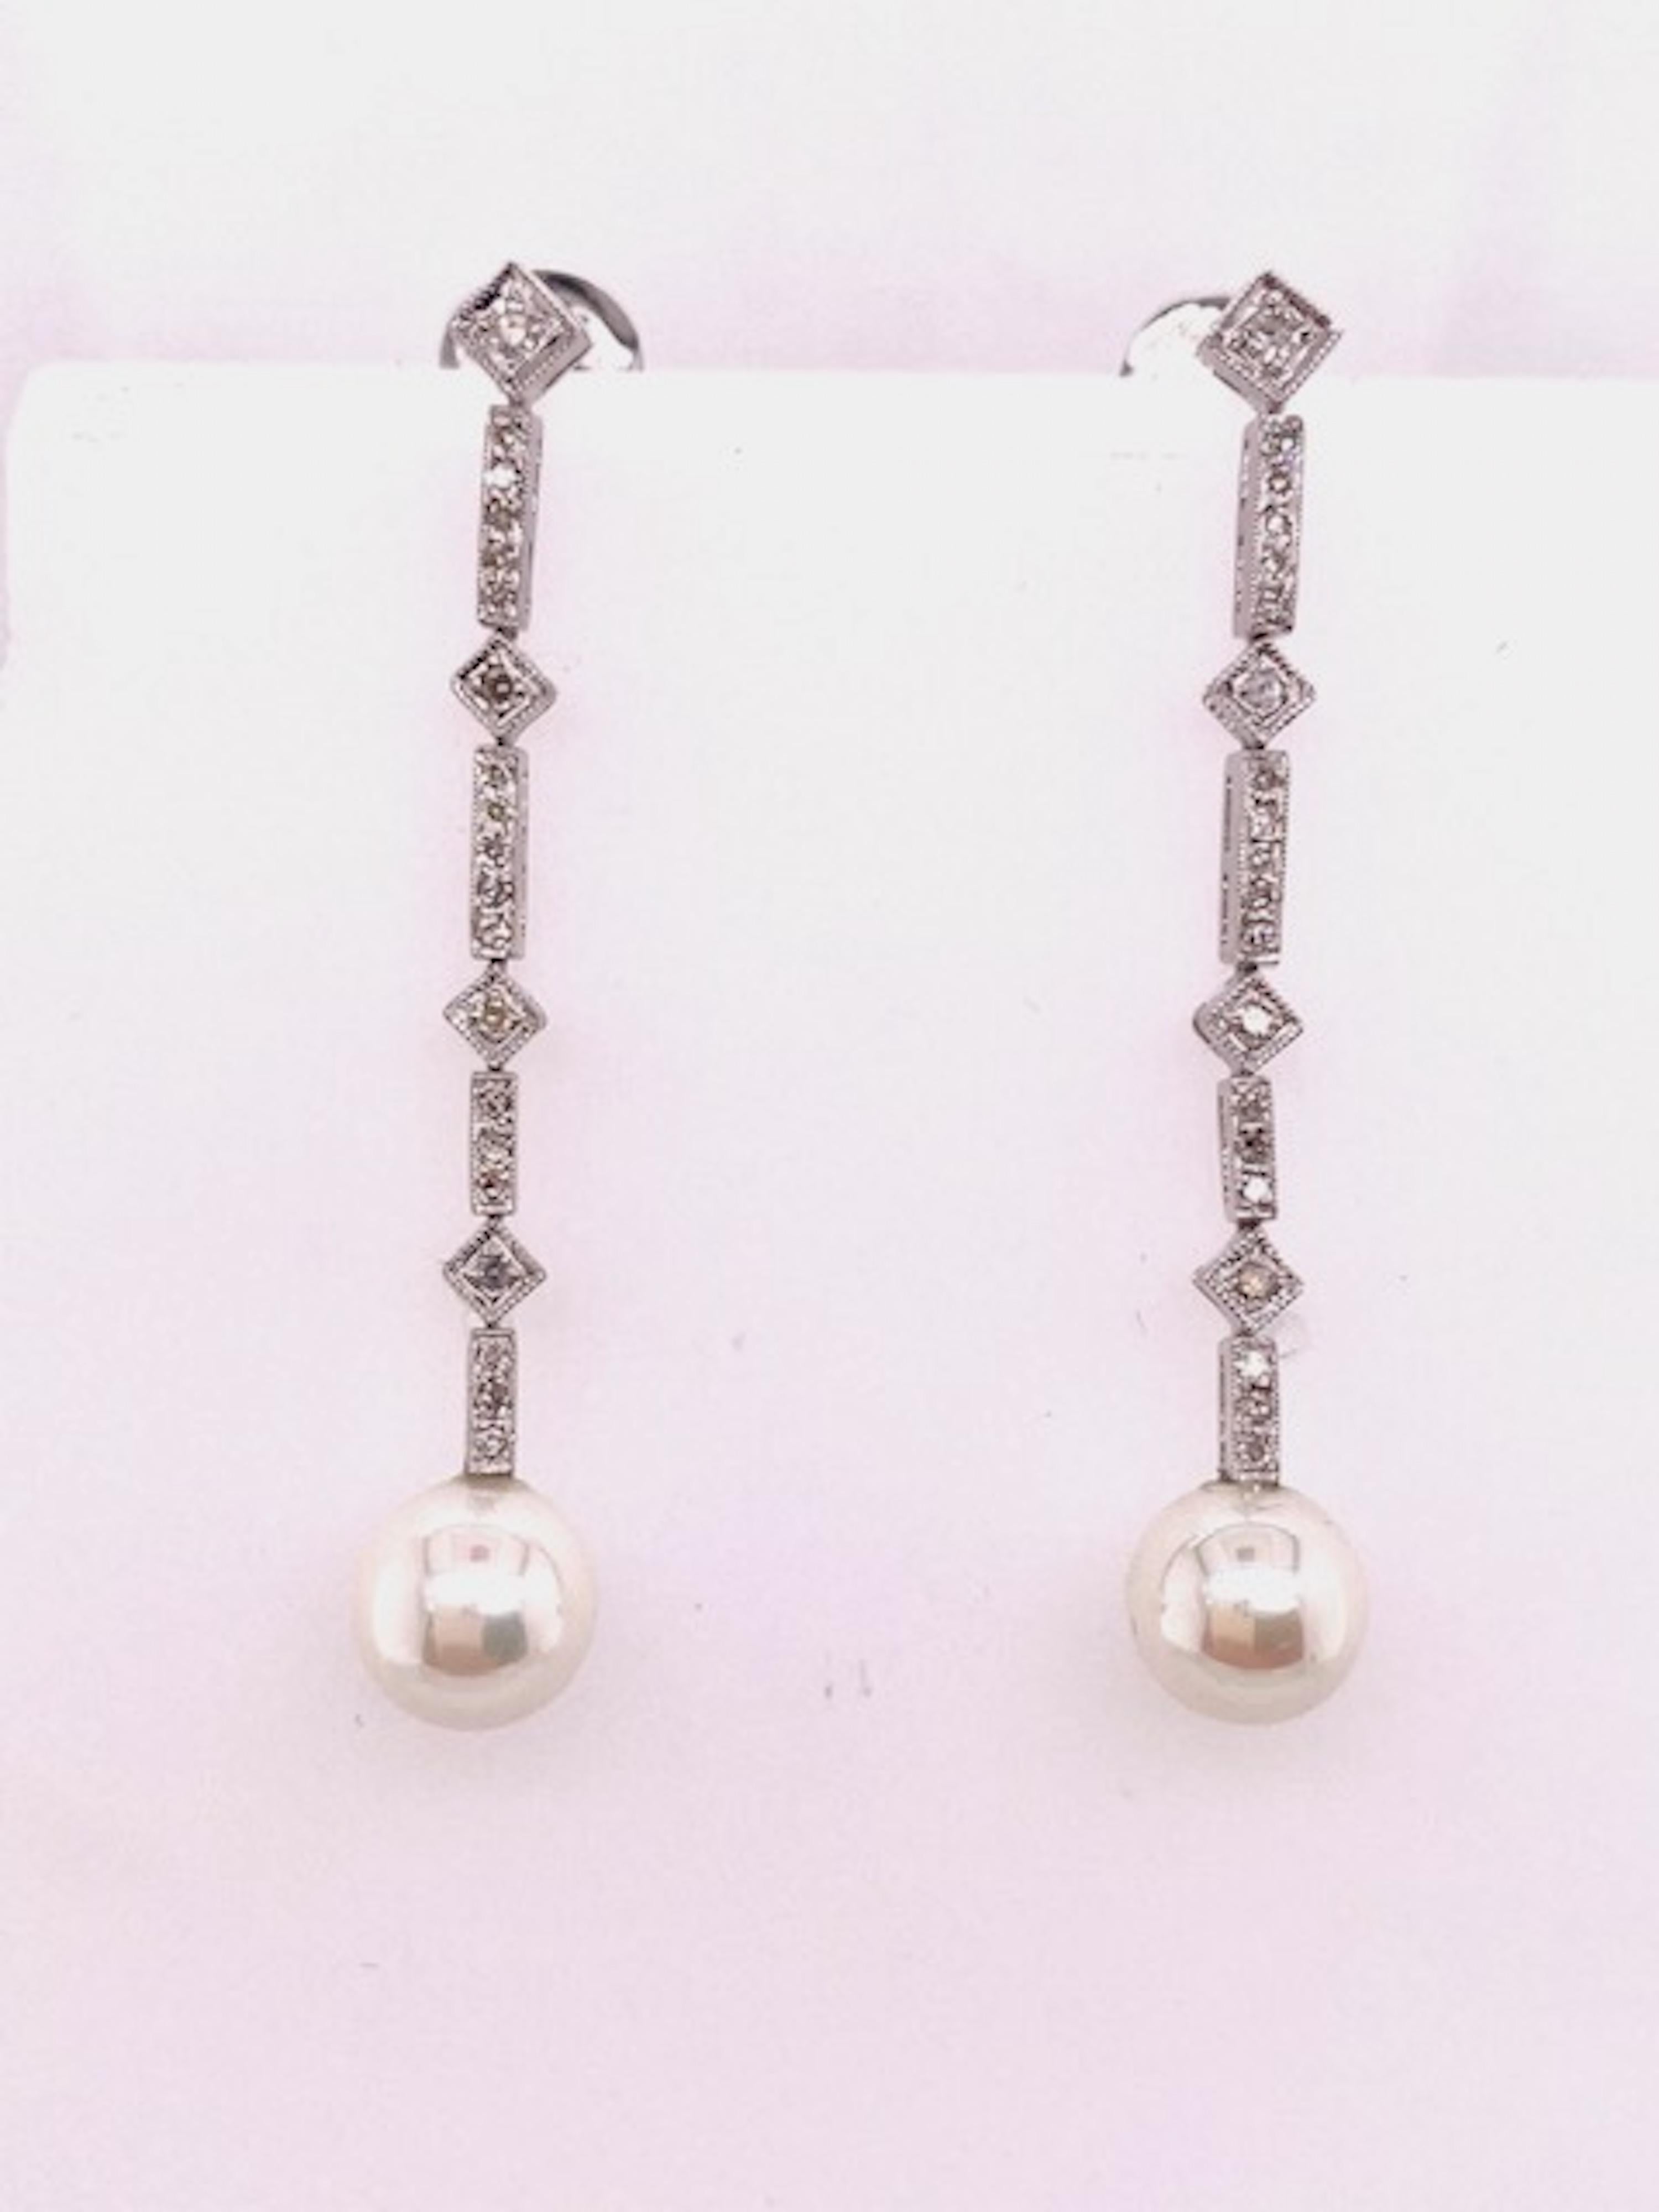 Diamond and Pearl White Gold Earrings In Excellent Condition For Sale In New York, NY